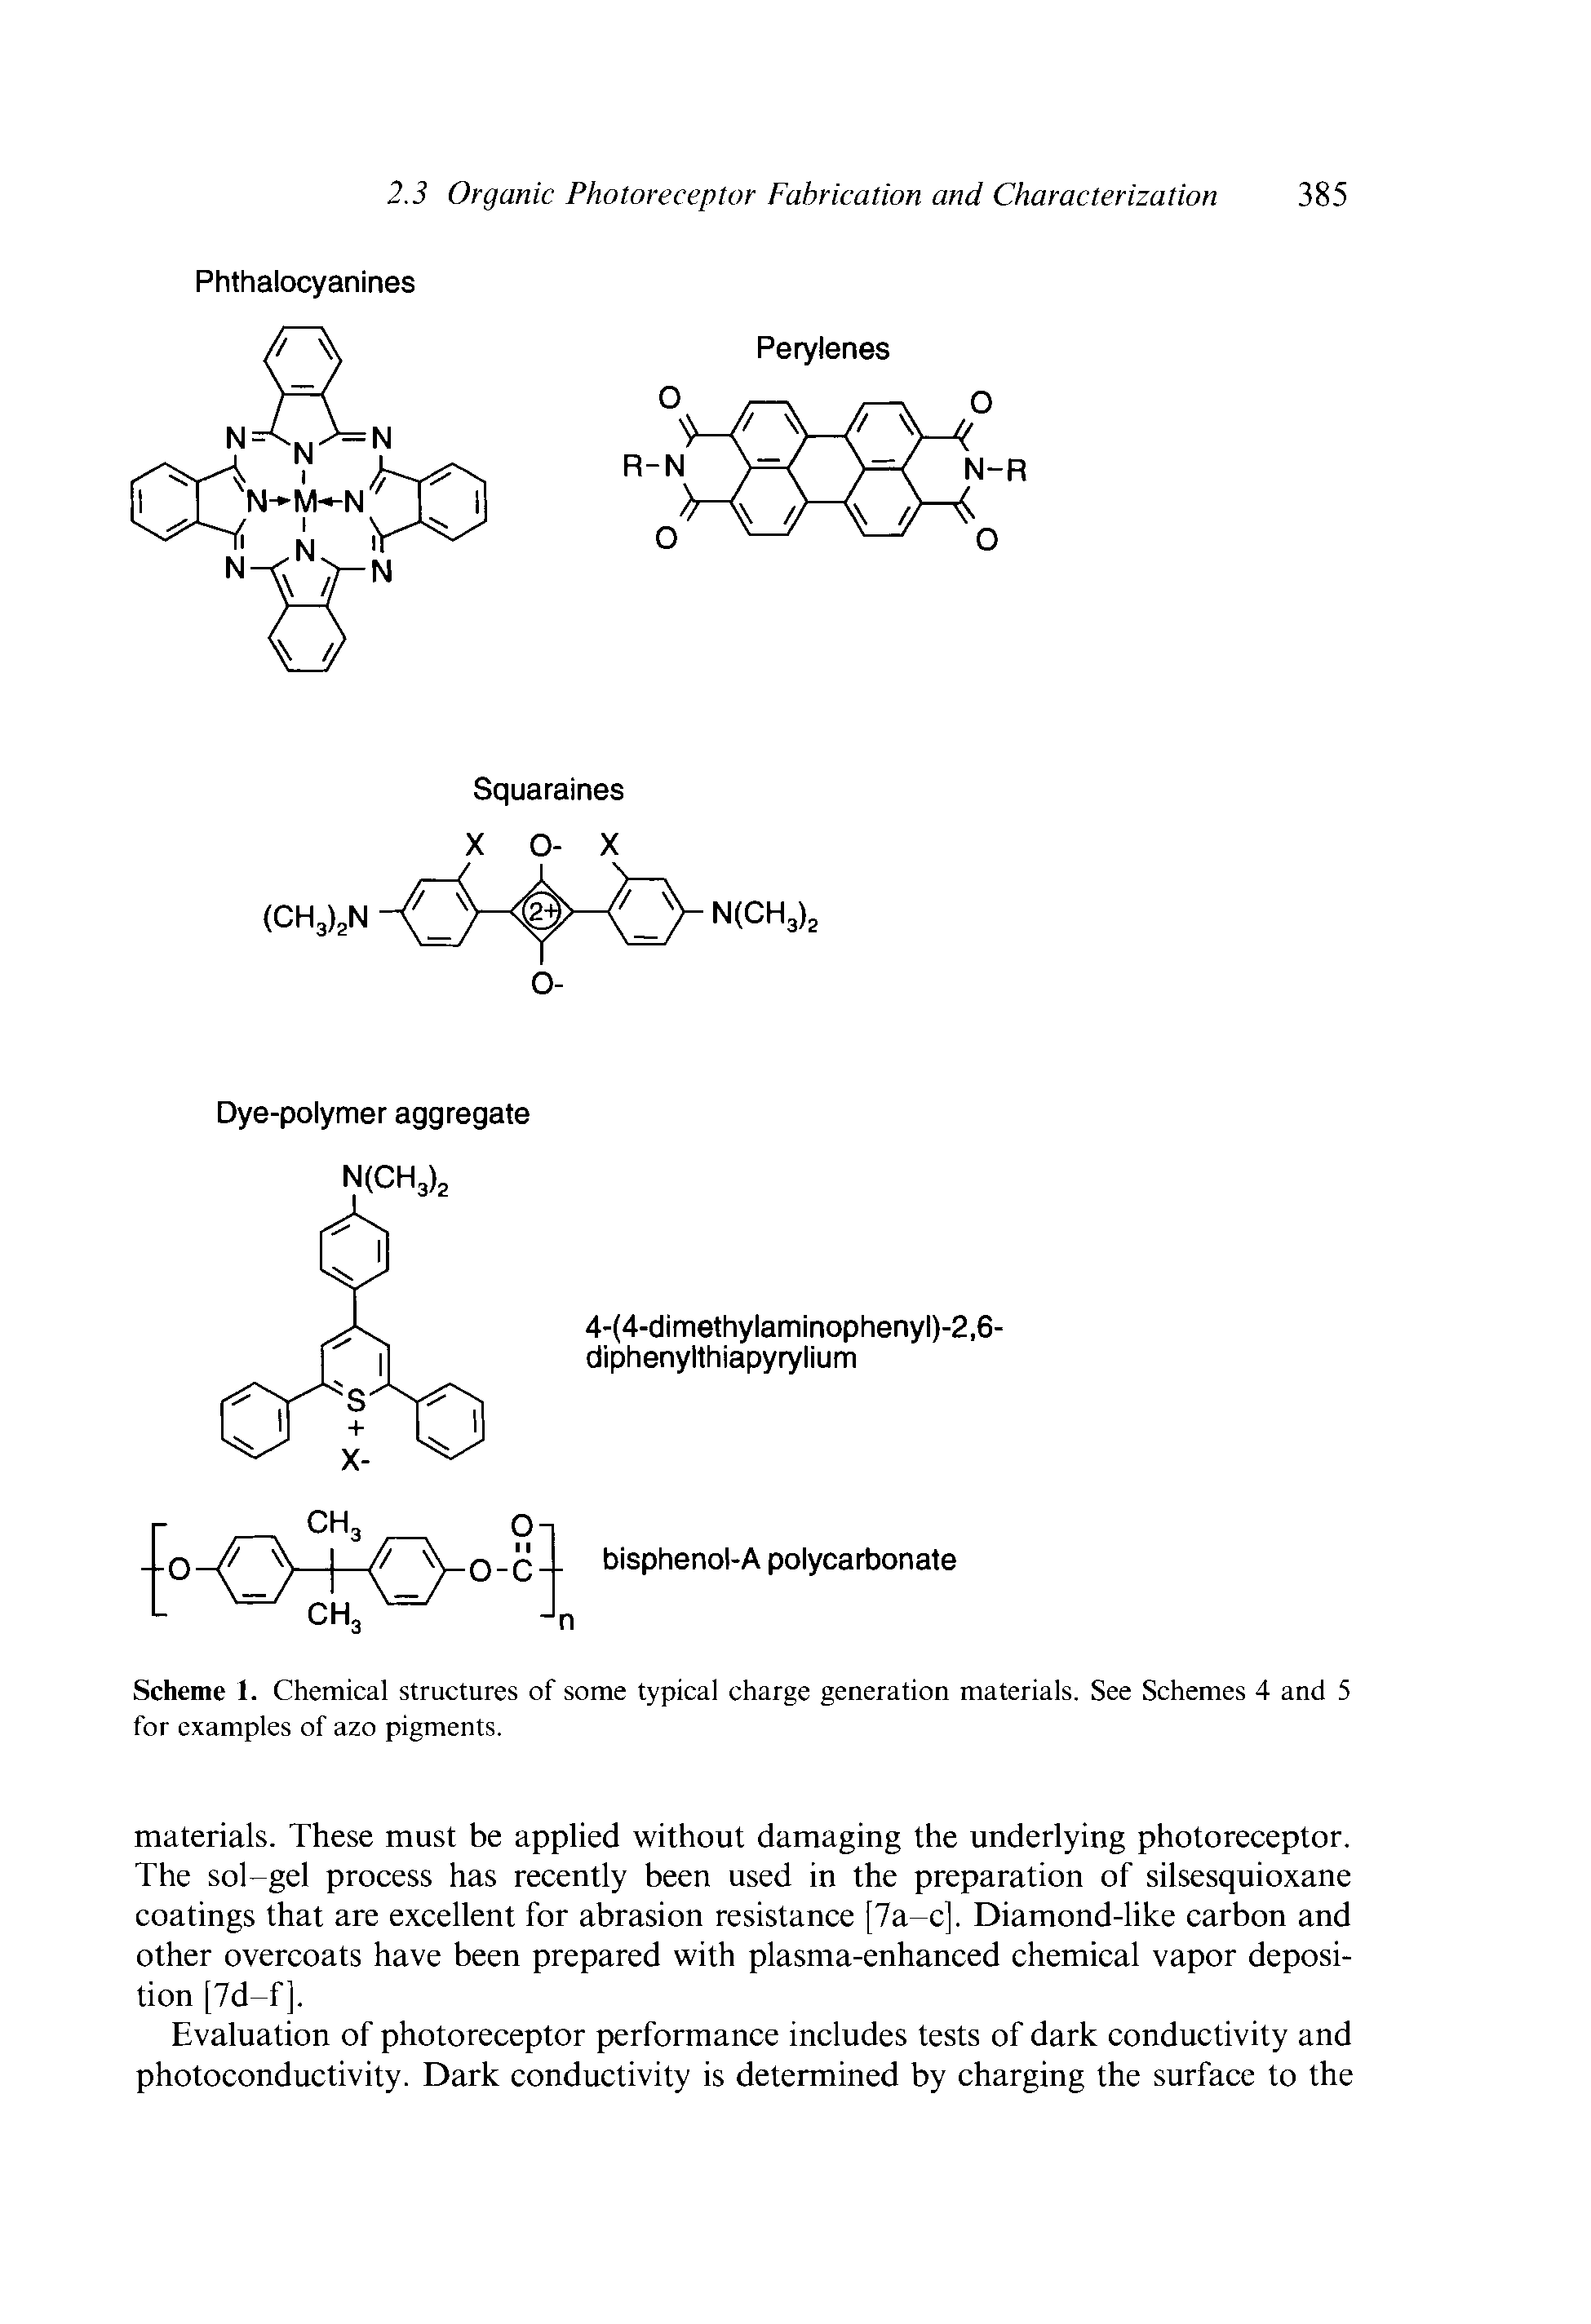 Scheme 1. Chemical structures of some typical charge generation materials. See Schemes 4 and 5 for examples of azo pigments.